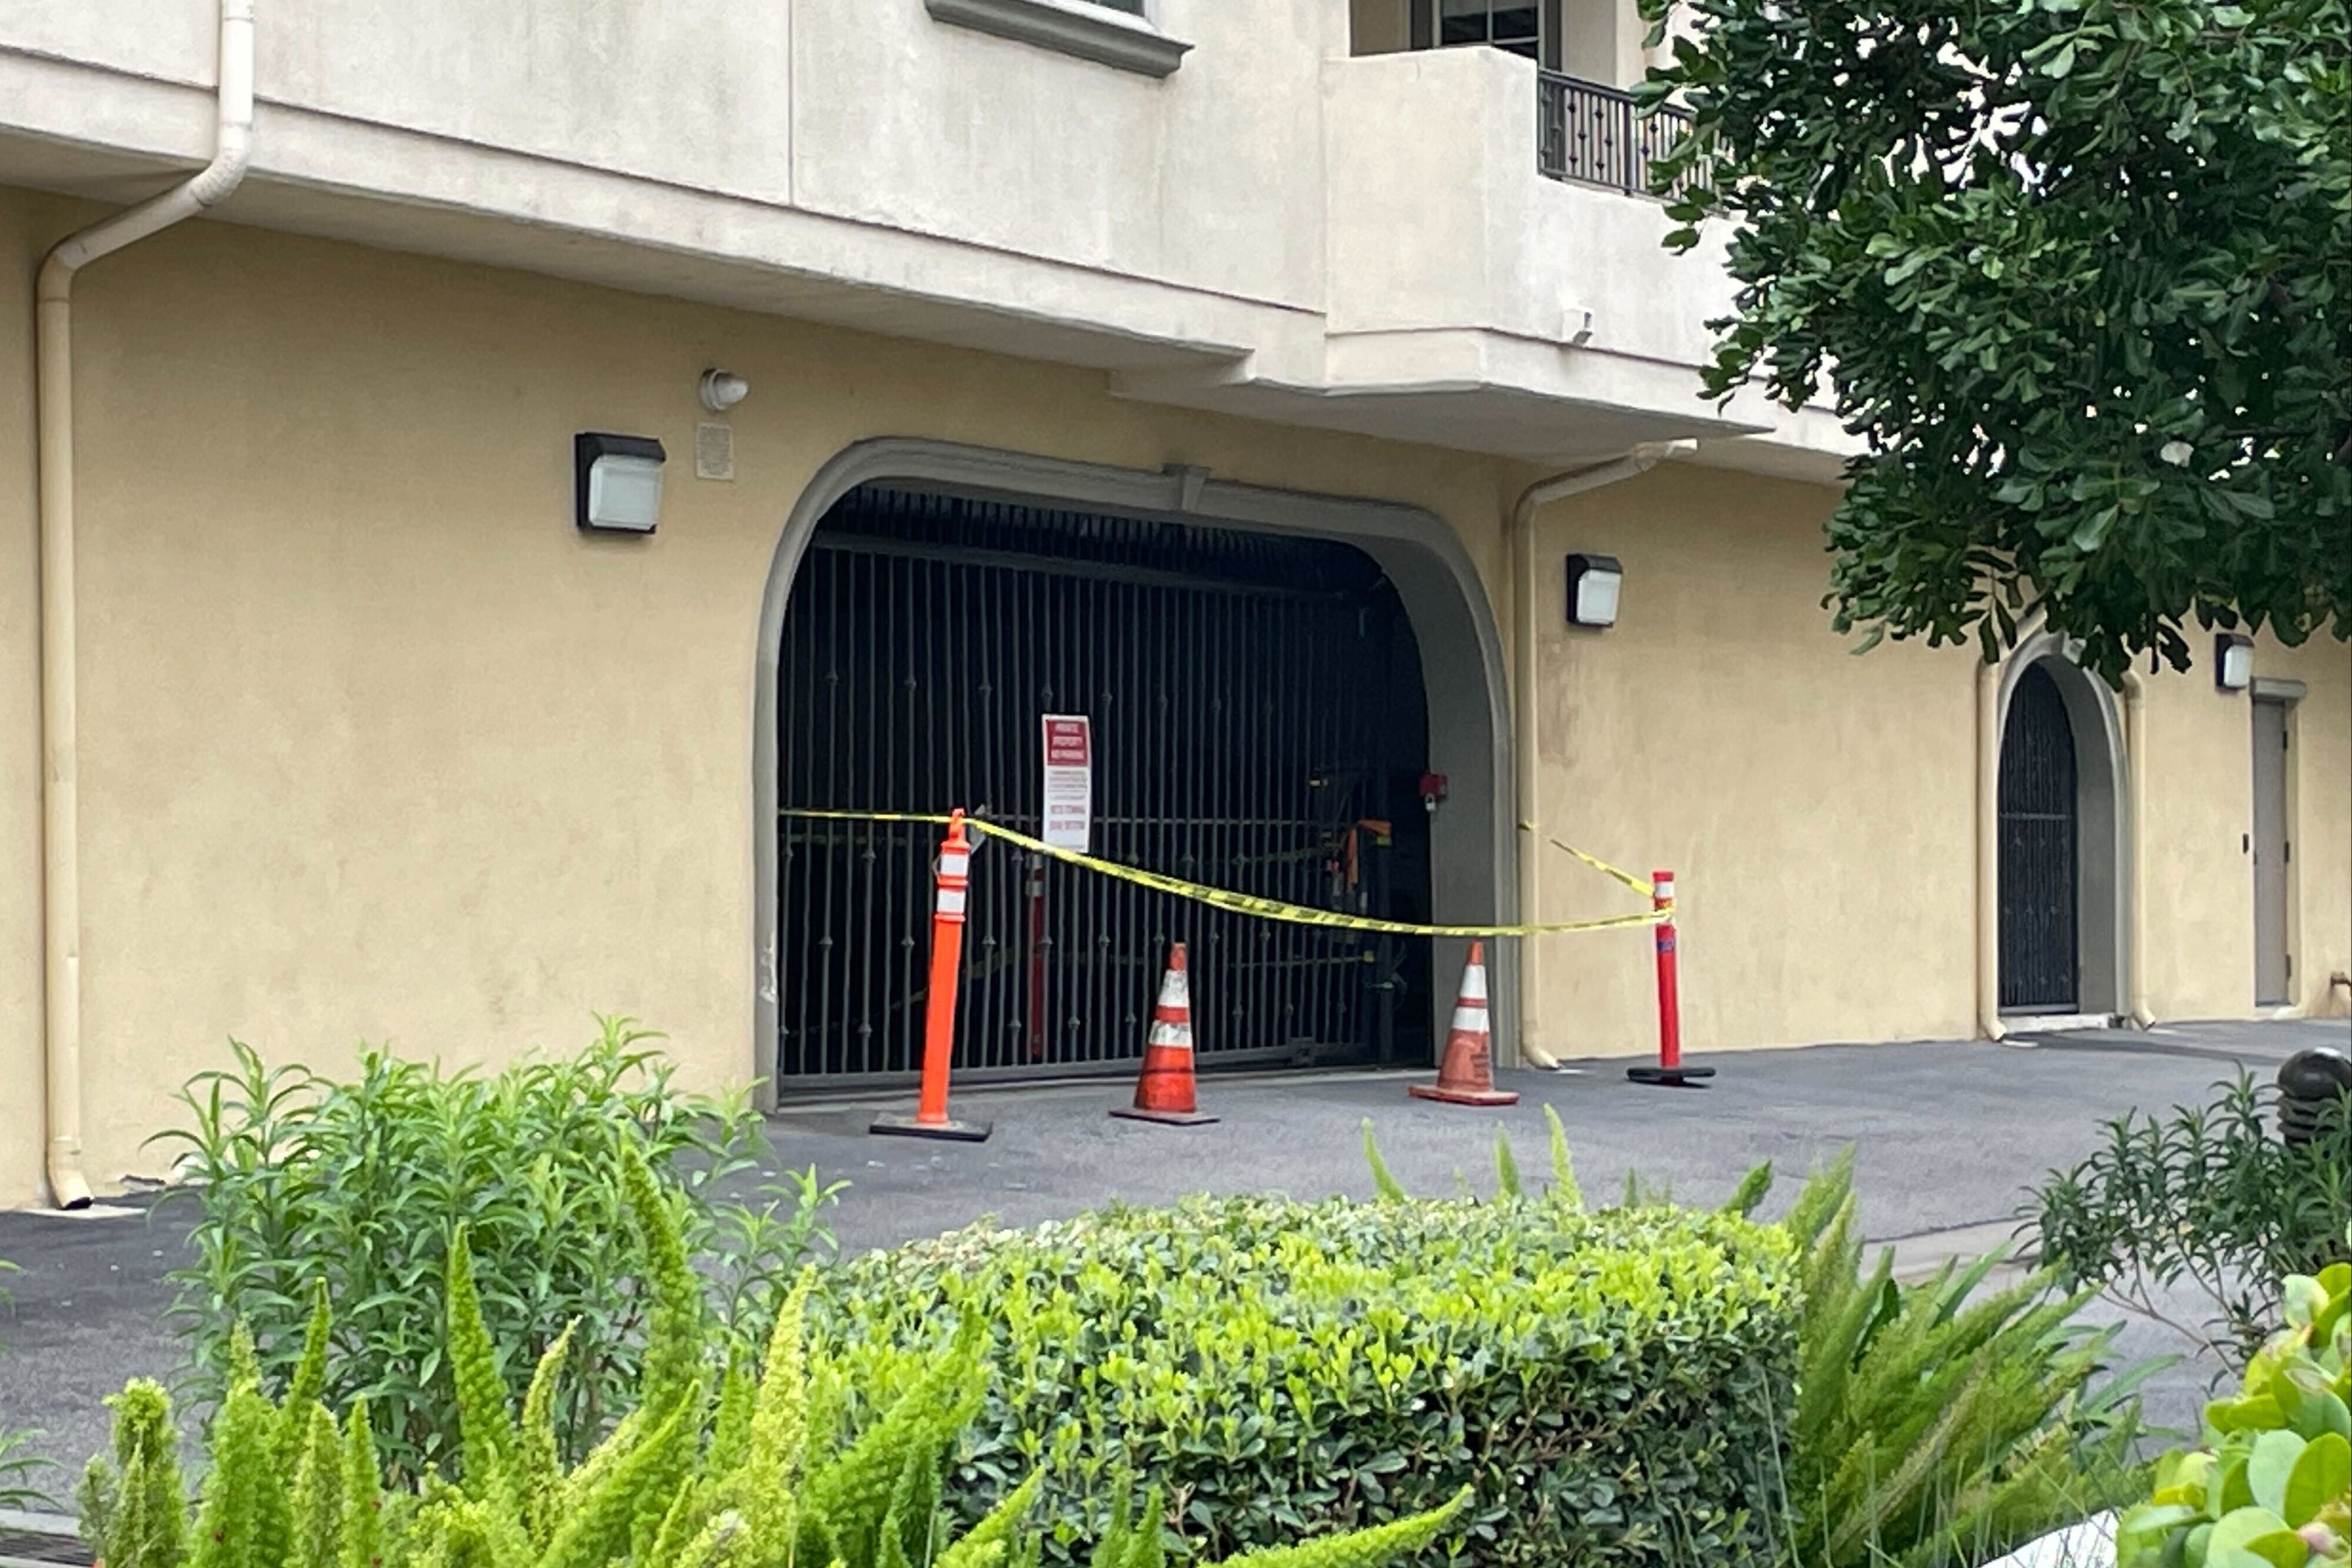 On Friday outside the complex, yellow caution tape was still in place around the gate that Johnson allegedly ploughed through in her Porsche SUV during her escape